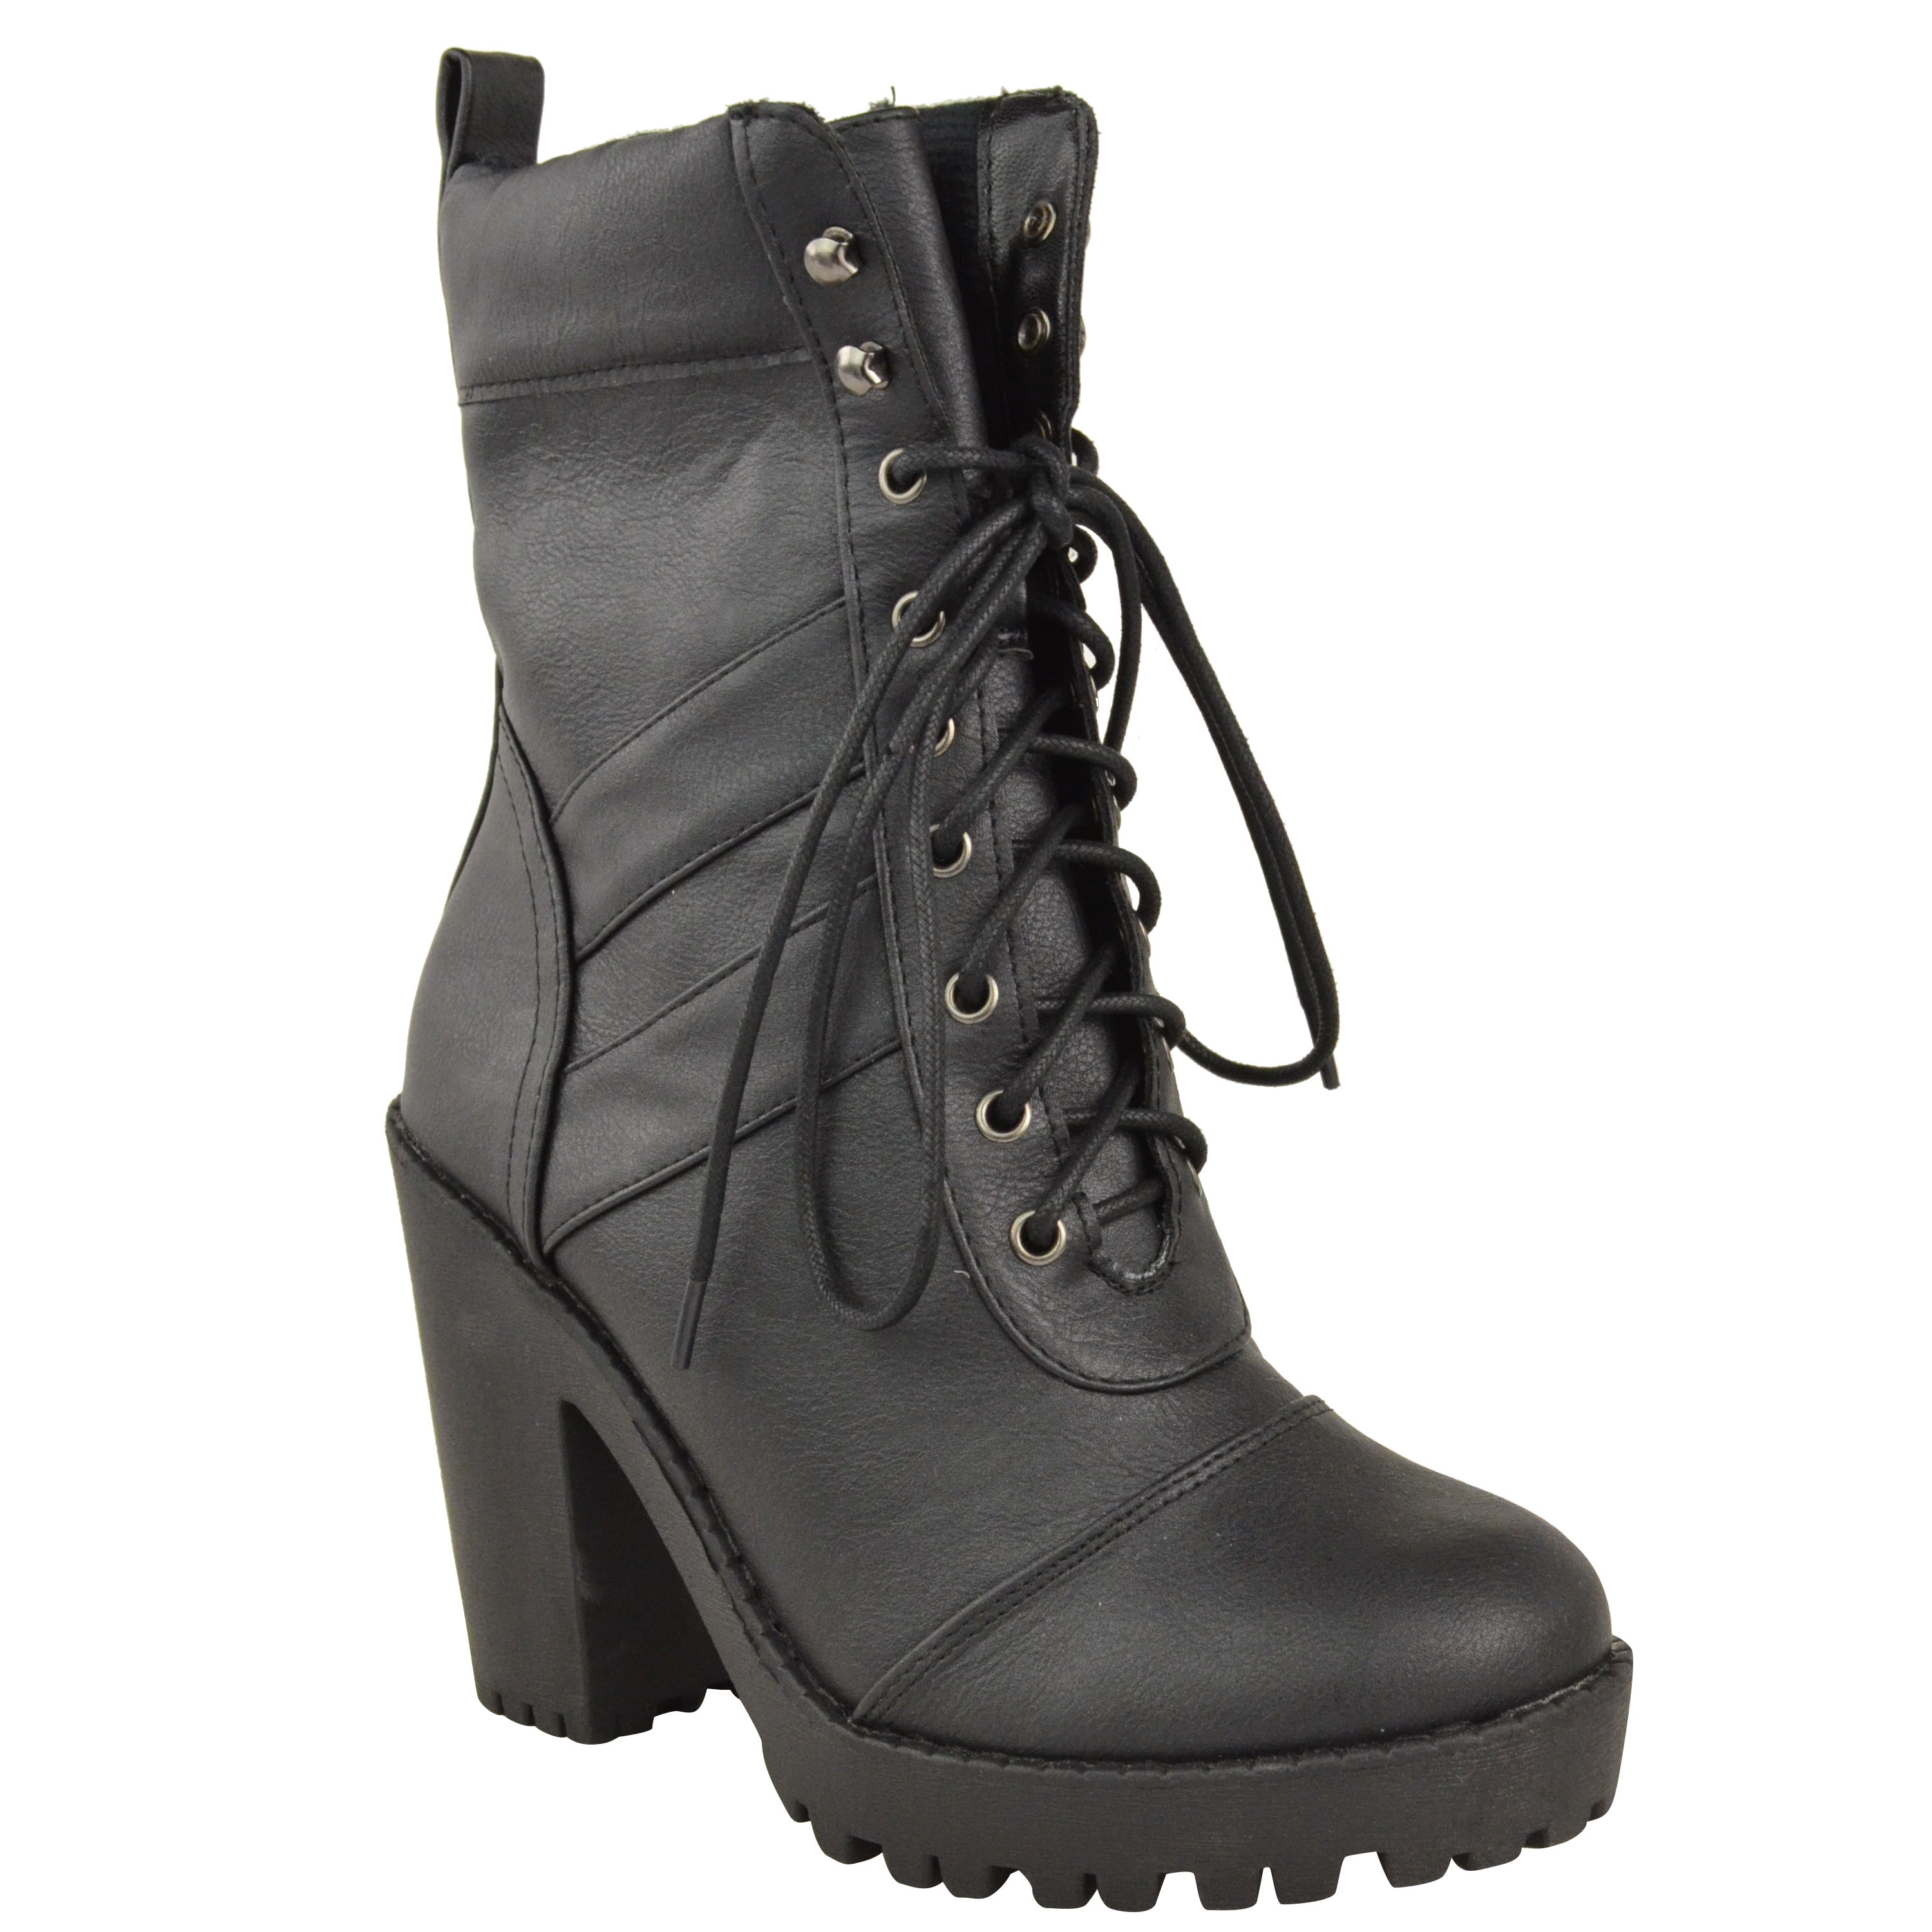 LADIES WOMENS HIGH HEEL LACE UP BIKER MILITARY COMBAT ARMY ANKLE BOOTS ...